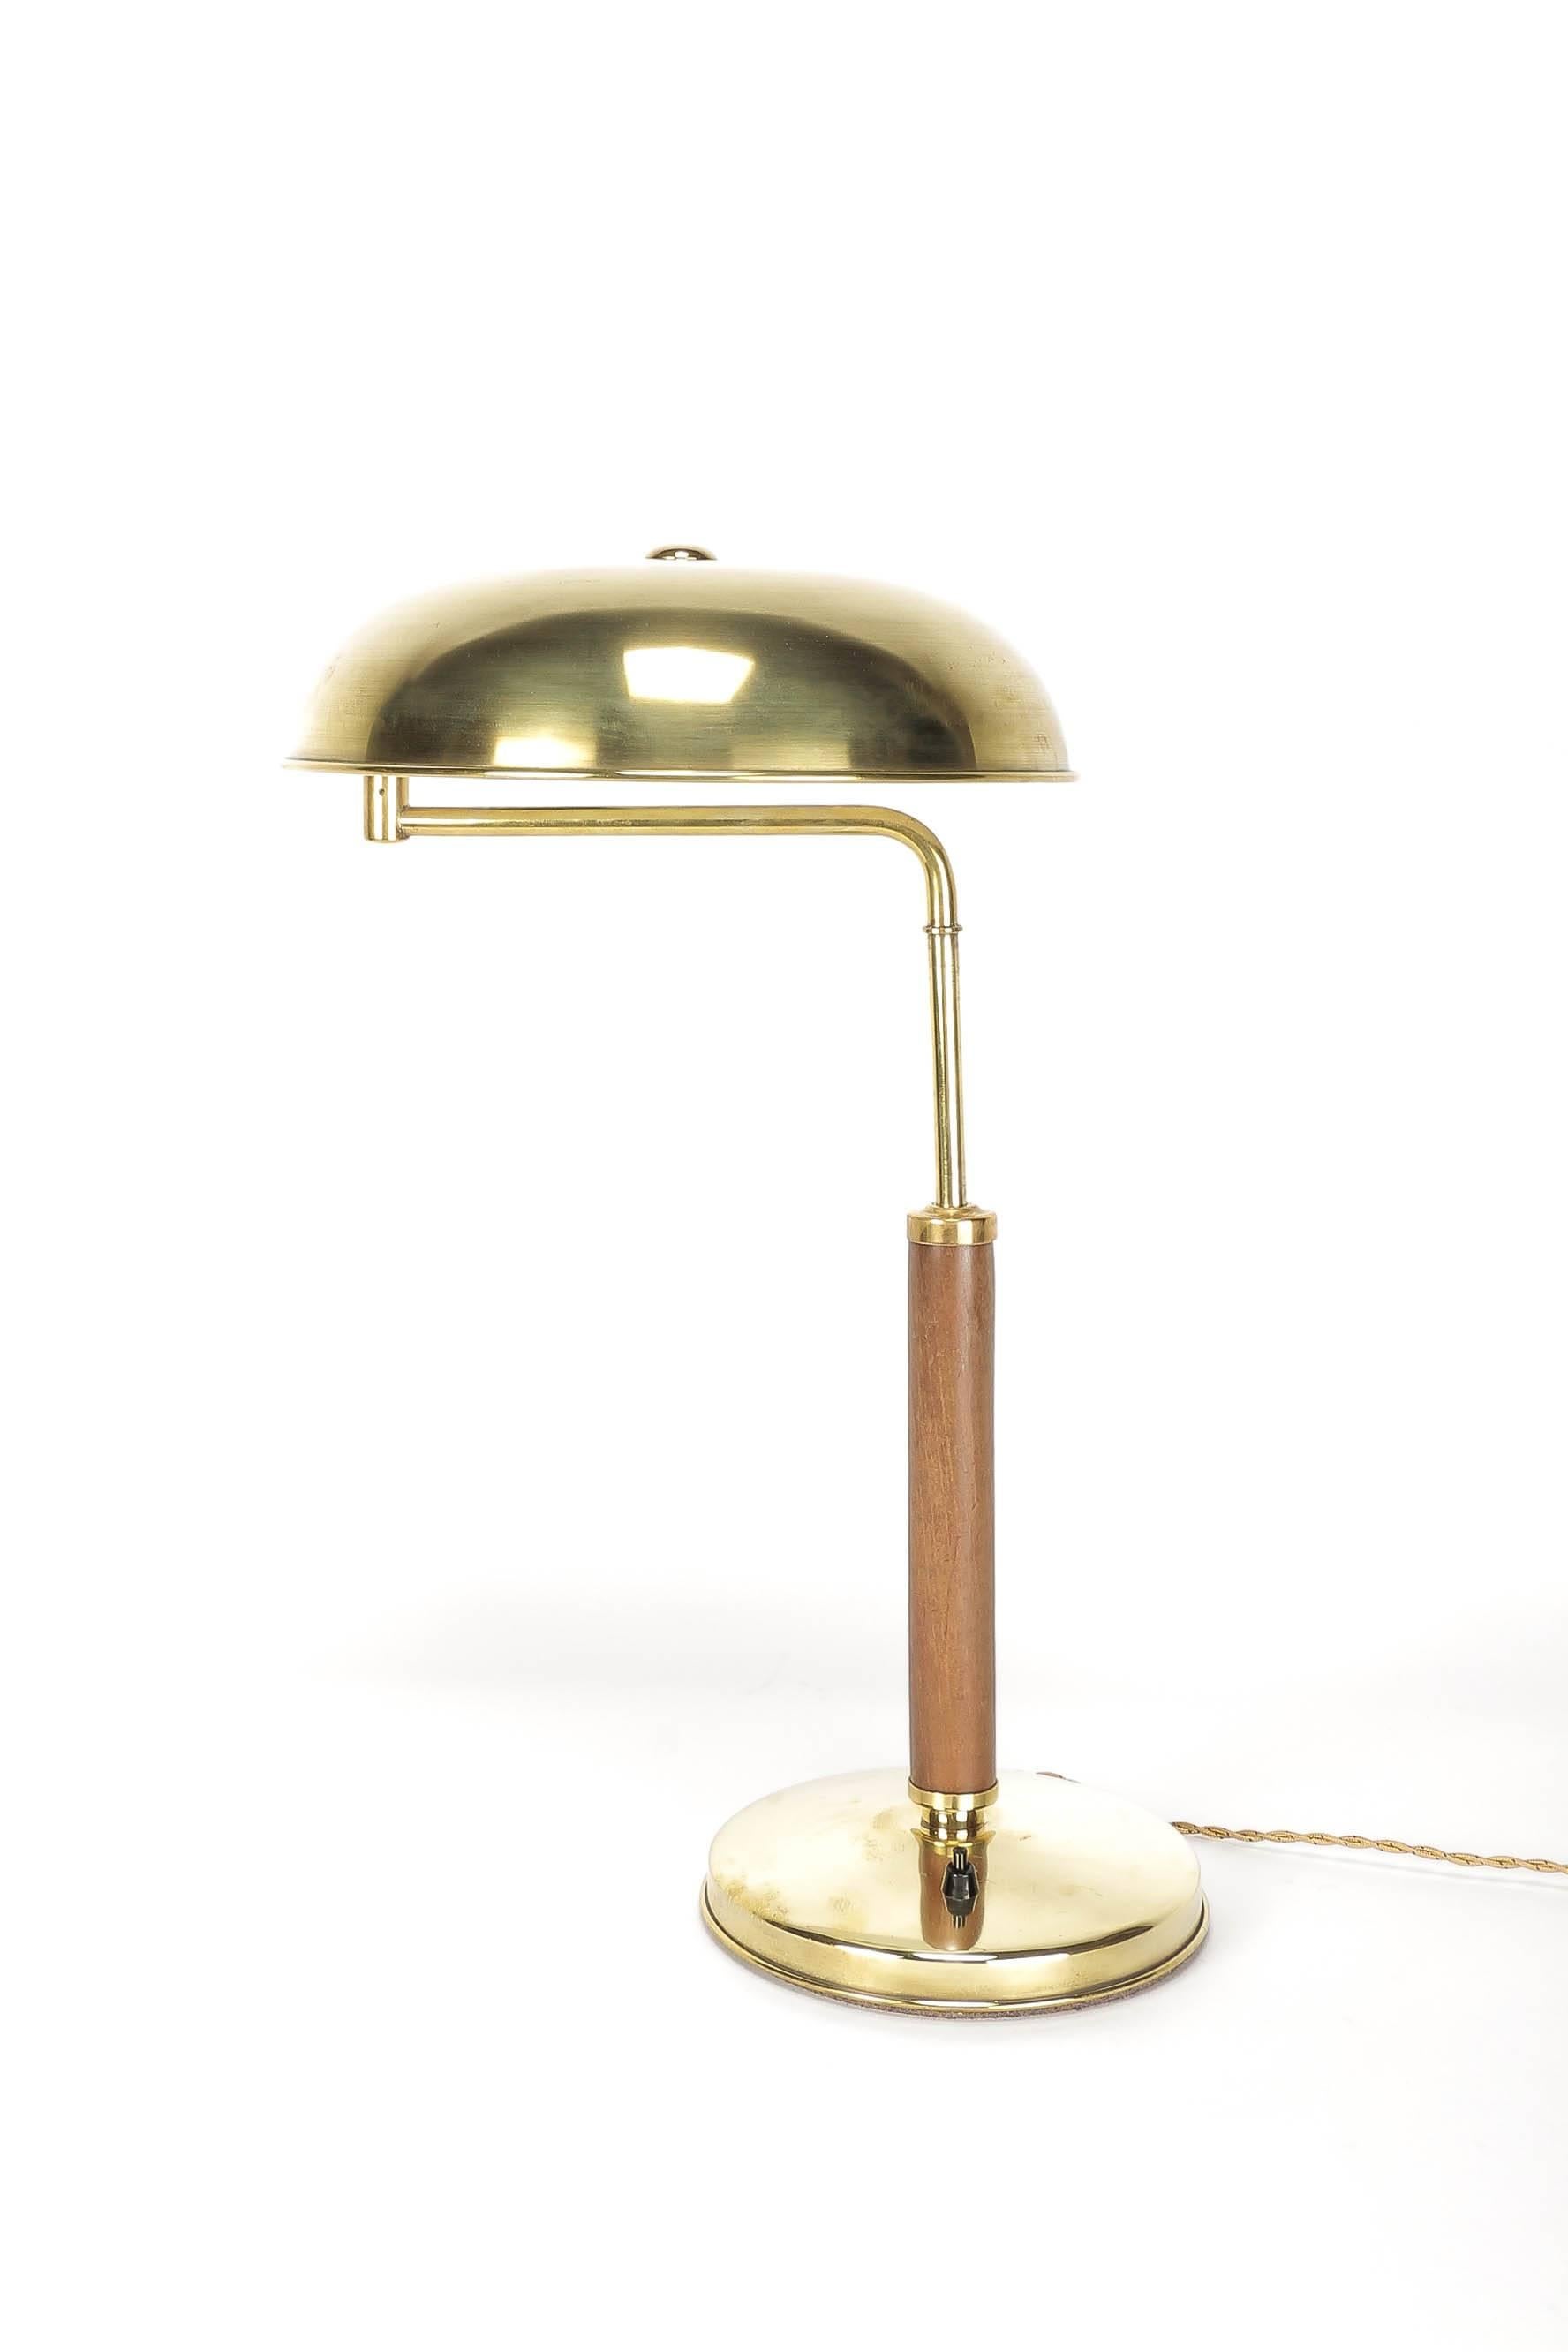 Wonderful desk lamp, model Quick 1500 designed by Alfred Mueller for AMBA, Switzerland in the 1940s. Made of solid brass and oak. Brass was polished, height adjustable with swiveling shade, new wired

Height: 46cm - 58cm!